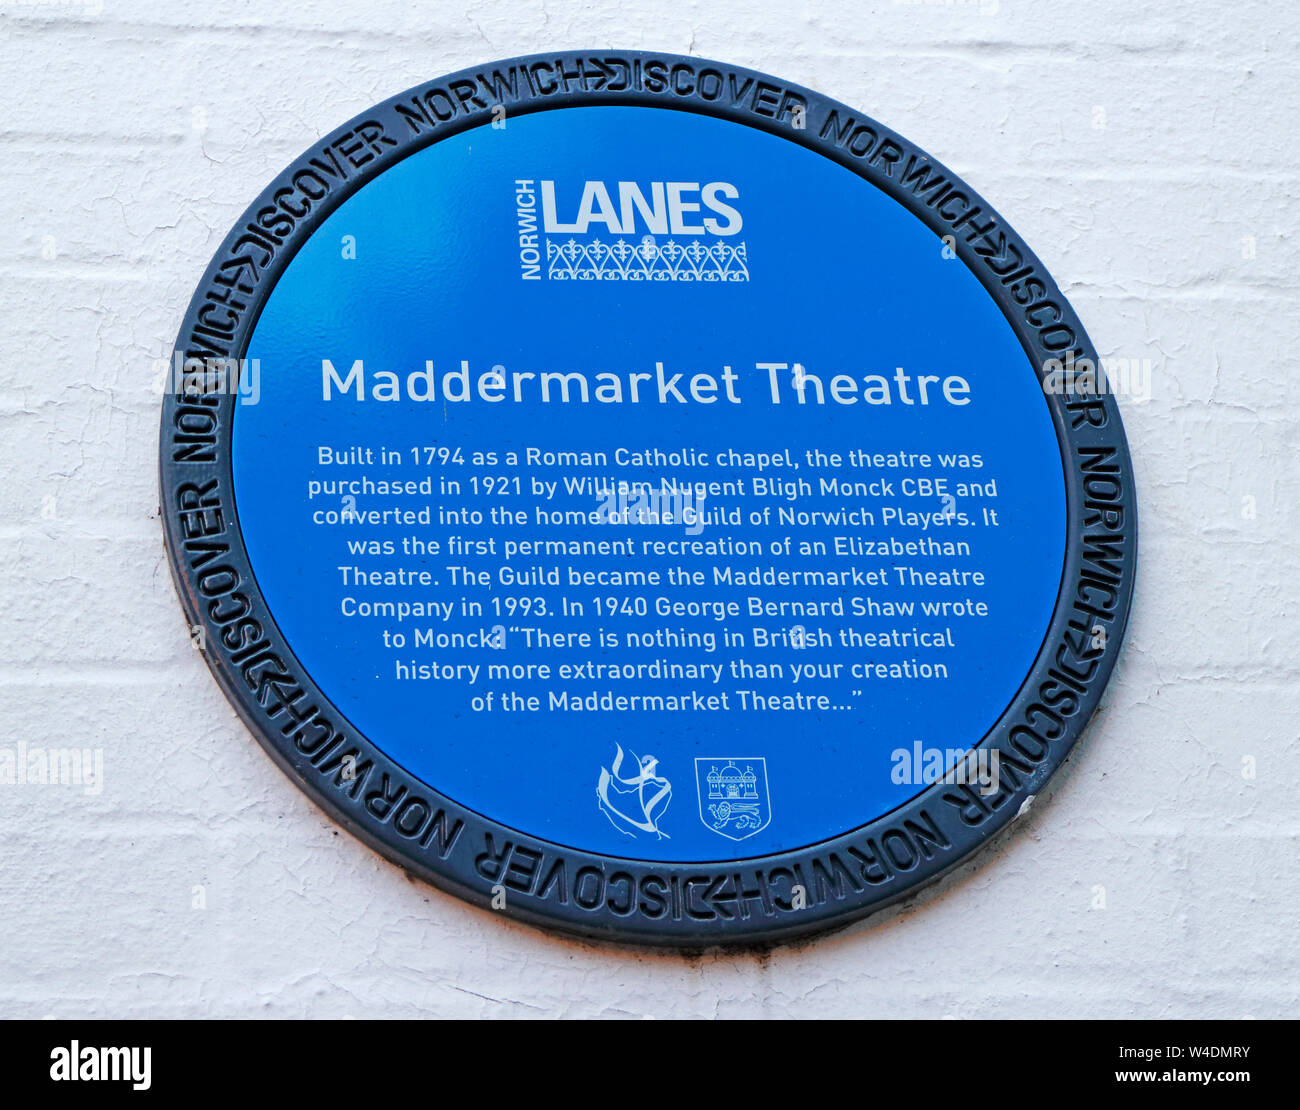 A Discover Norwich blue plaque in Norwich Lanes by the Maddermarket Theatre, Norwich, Norfolk, England, United Kingdom, Europe. Stock Photo